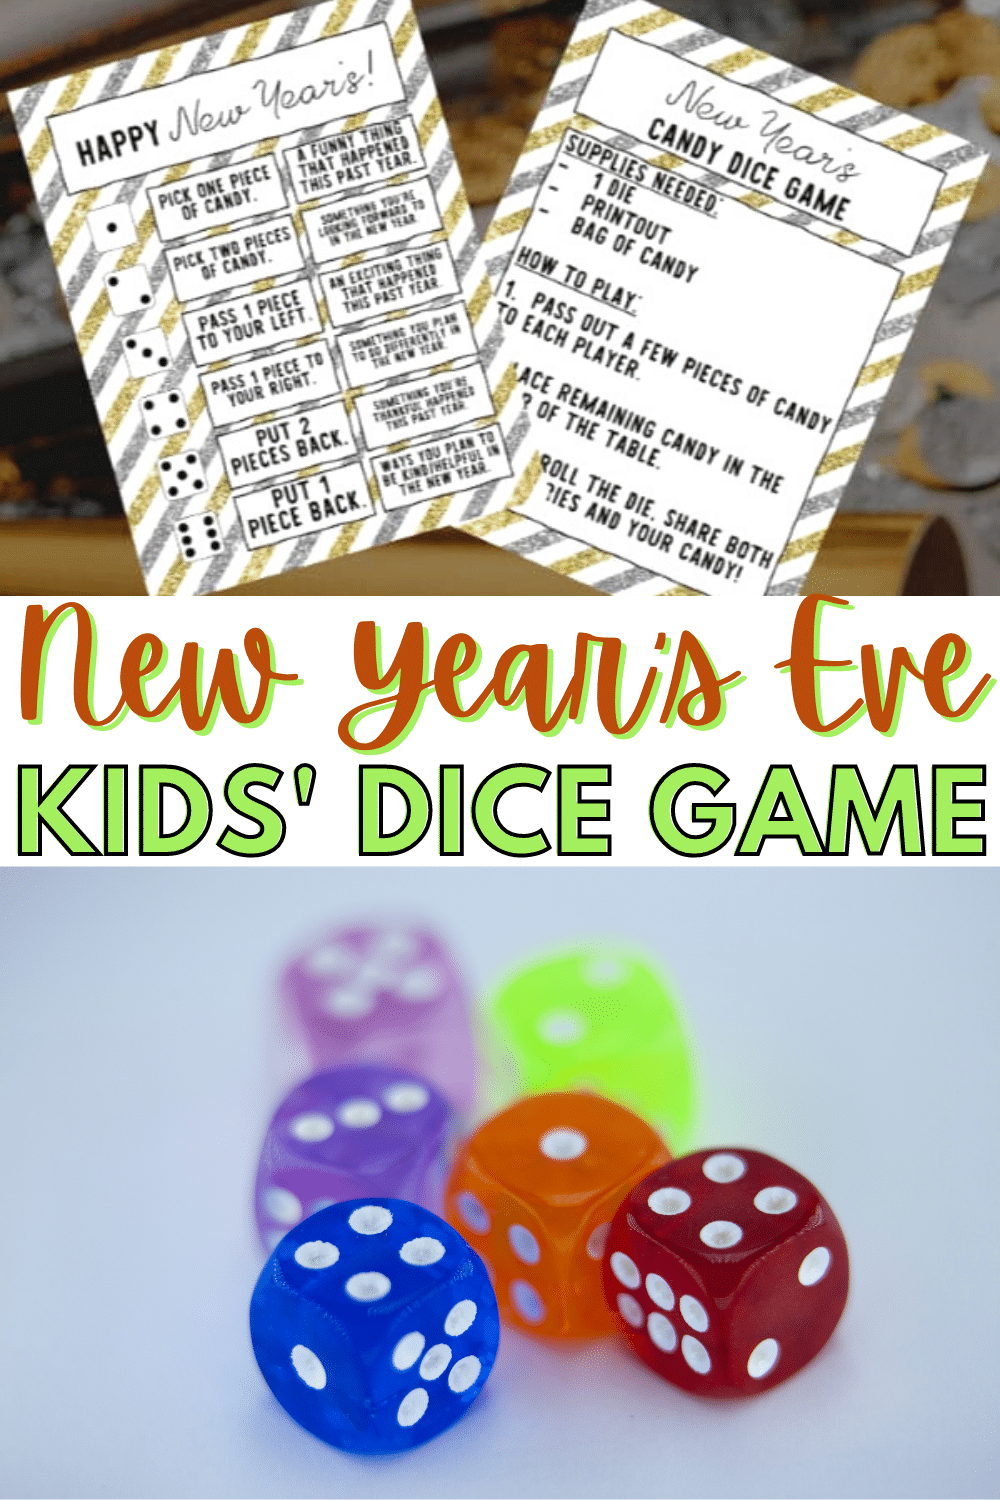 This simple New Year Dice Game for Kids is played with dice and candy and comes with a free printable too. There will be lots of laughs with this fun game. #newyears #dicegames #activitiesforkids via @wondermomwannab